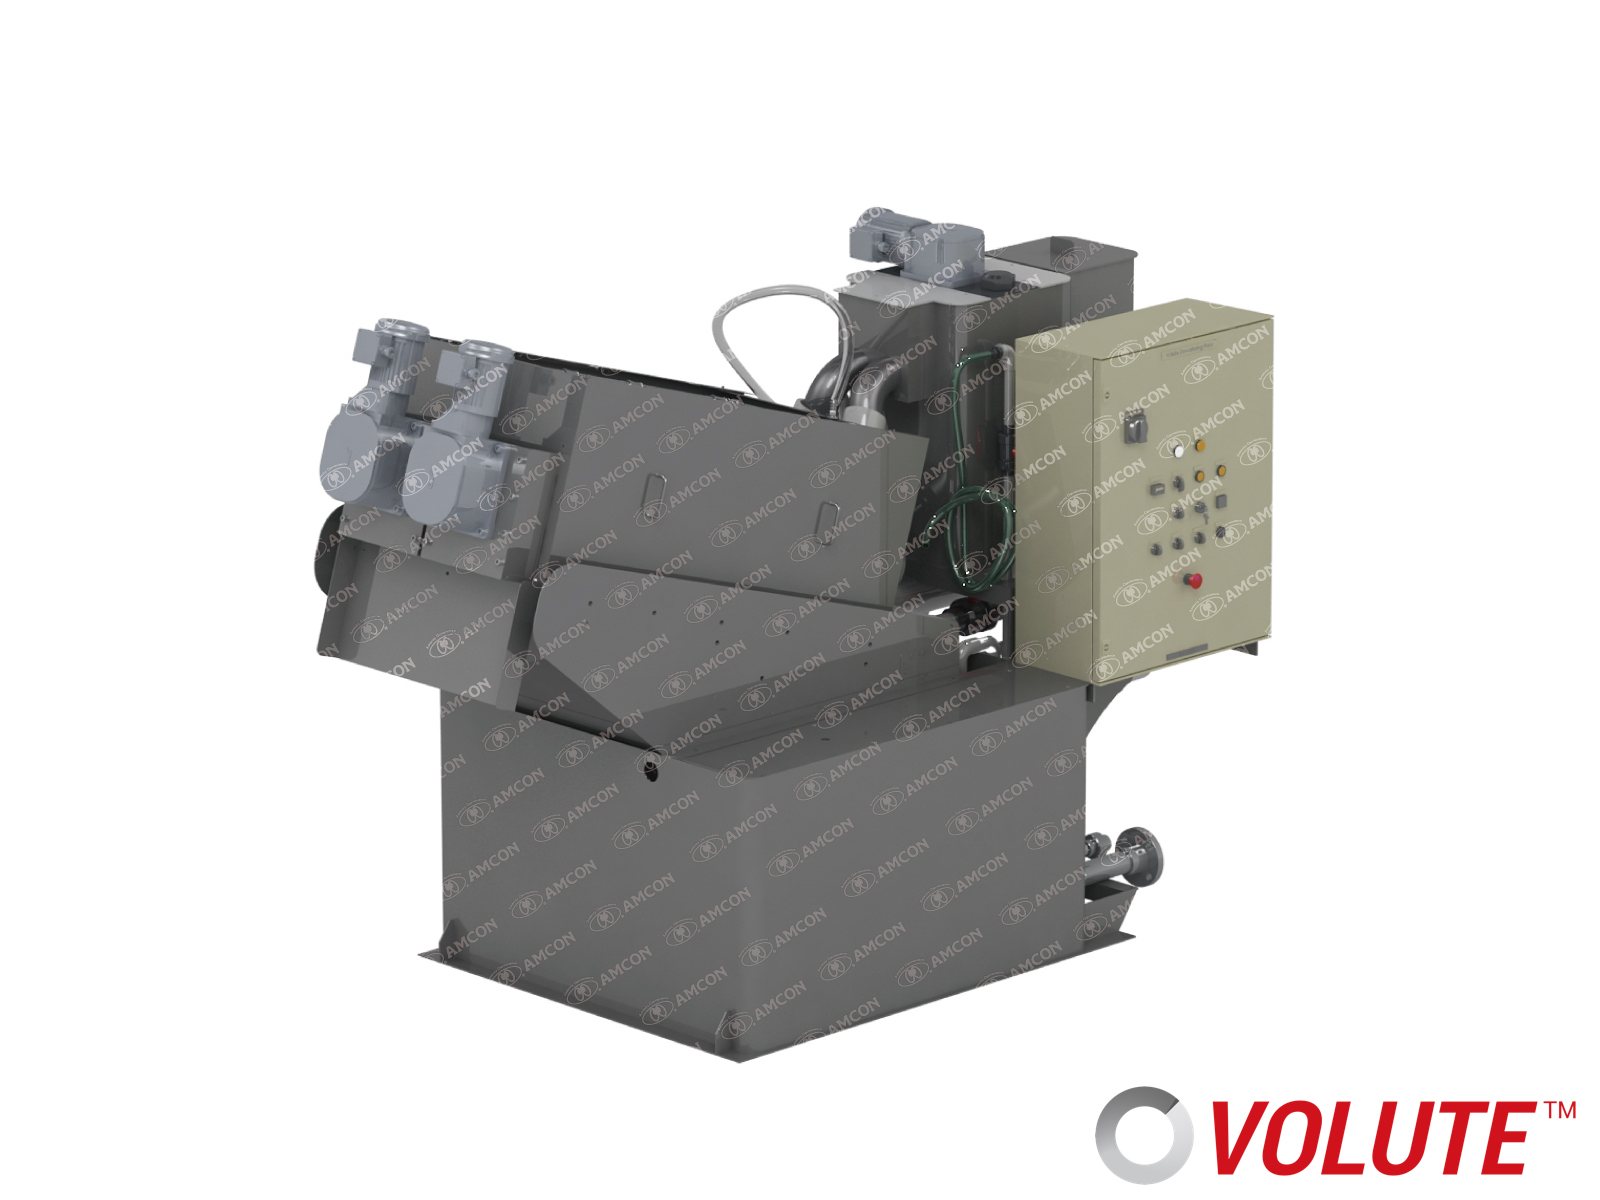 <strong>VOLUTE™ Dewatering Press</strong><br><strong>EC Series</strong>